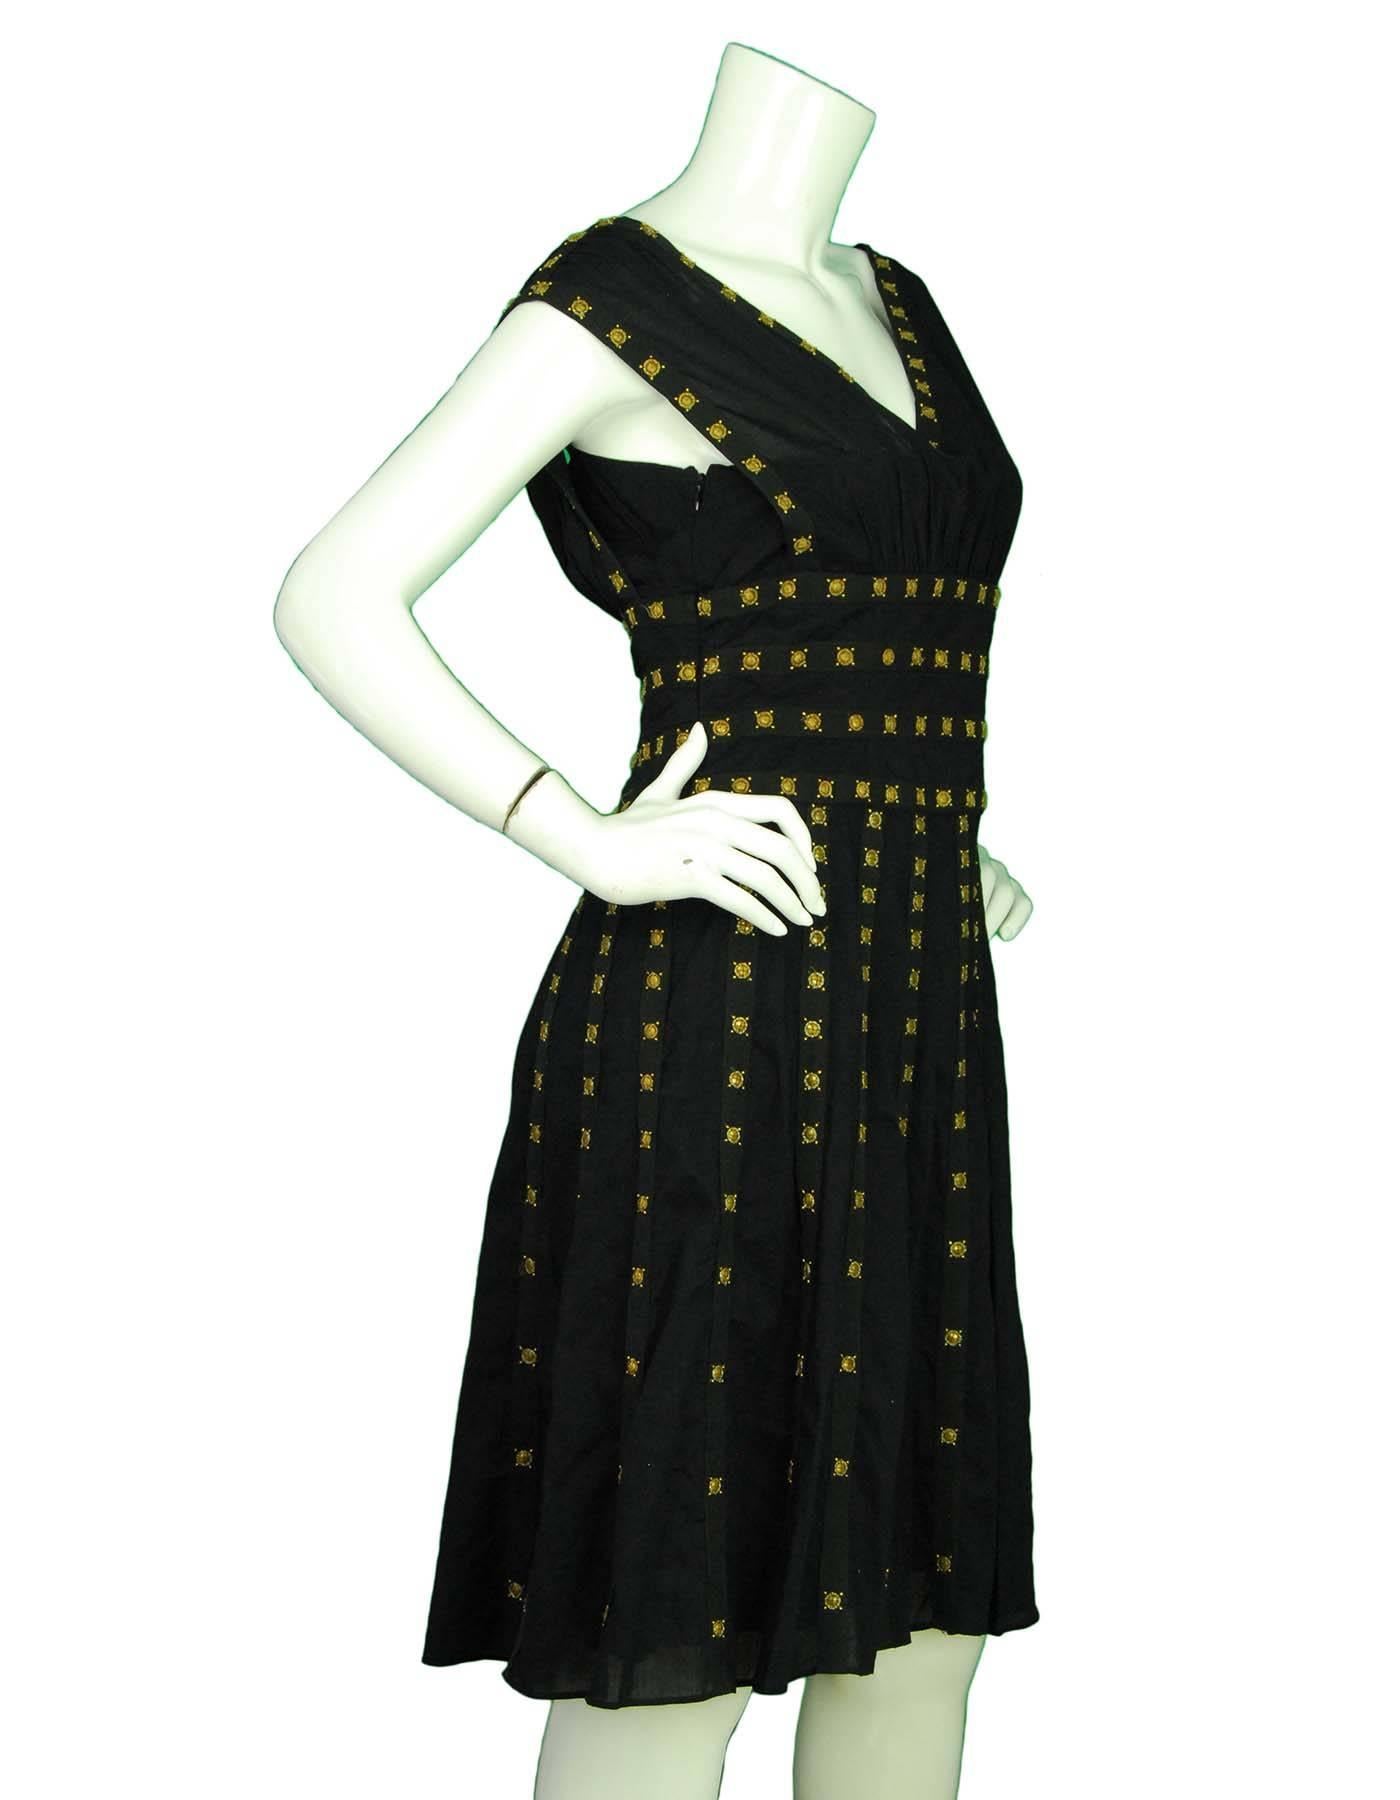 Temperly London Black Beaded Dress Sz 10

Features goltone beading throughout

Made In: India
Color: Black and gold
Composition: 100% Cotton
Lining: Black 100% Silk
Closure/Opening: Hidden side zip closure
Overall Condition: Excellent